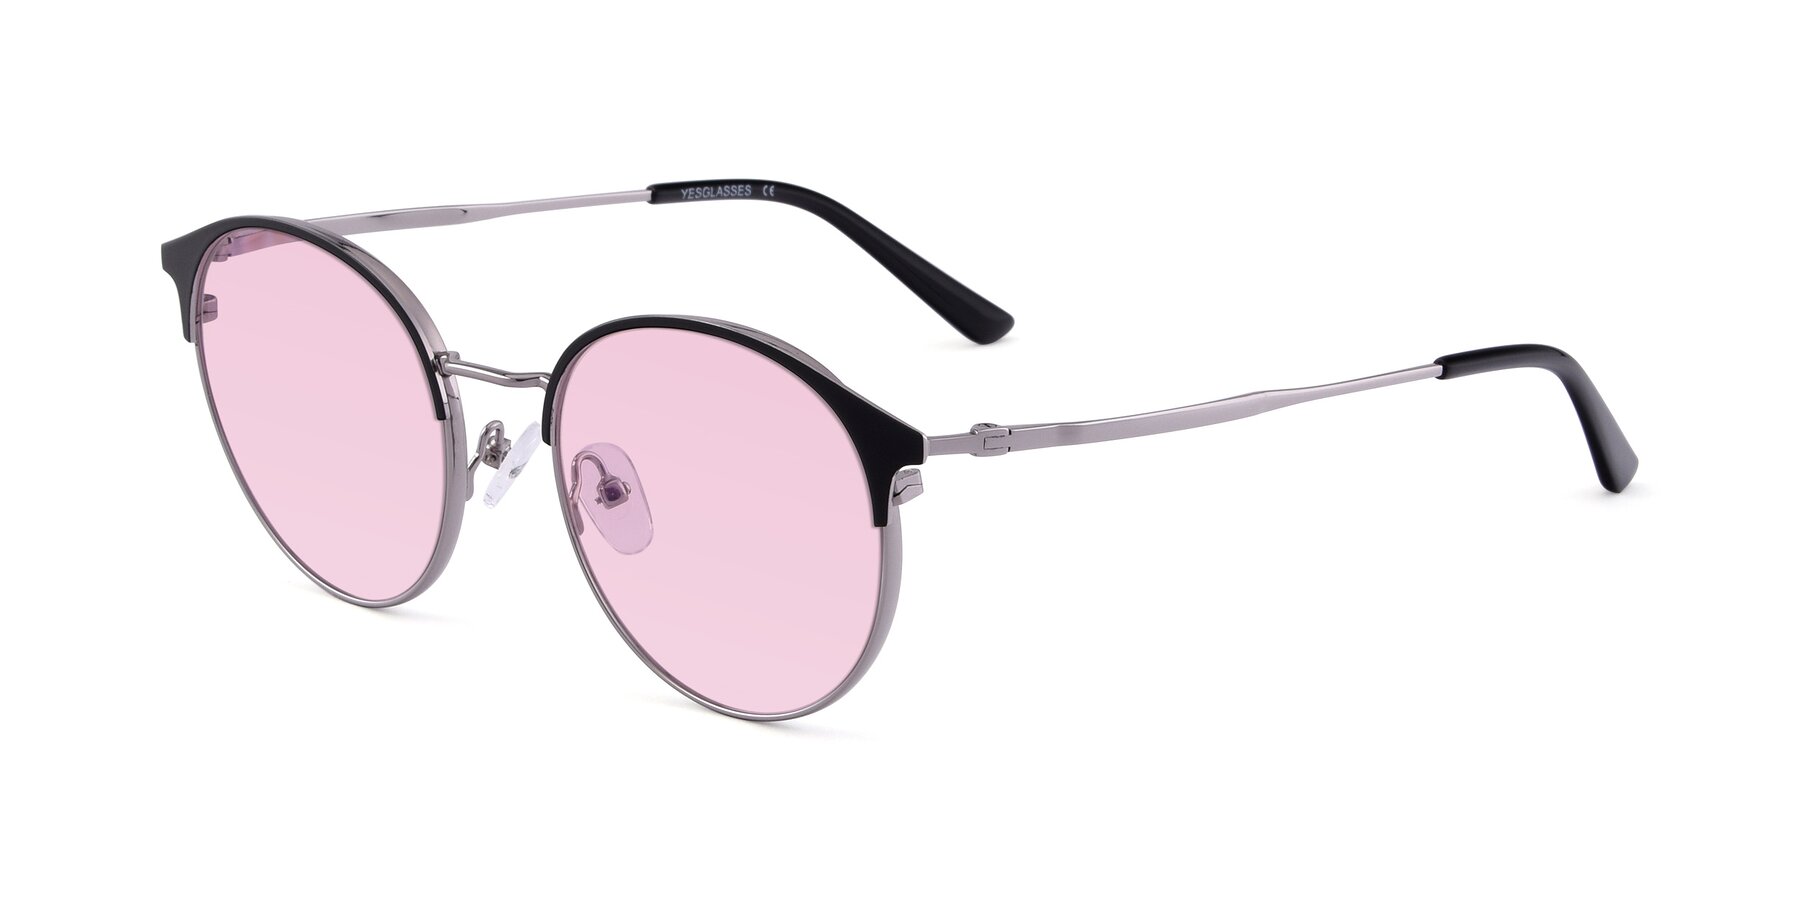 Angle of Berkley in Black-Gunmetal with Light Pink Tinted Lenses